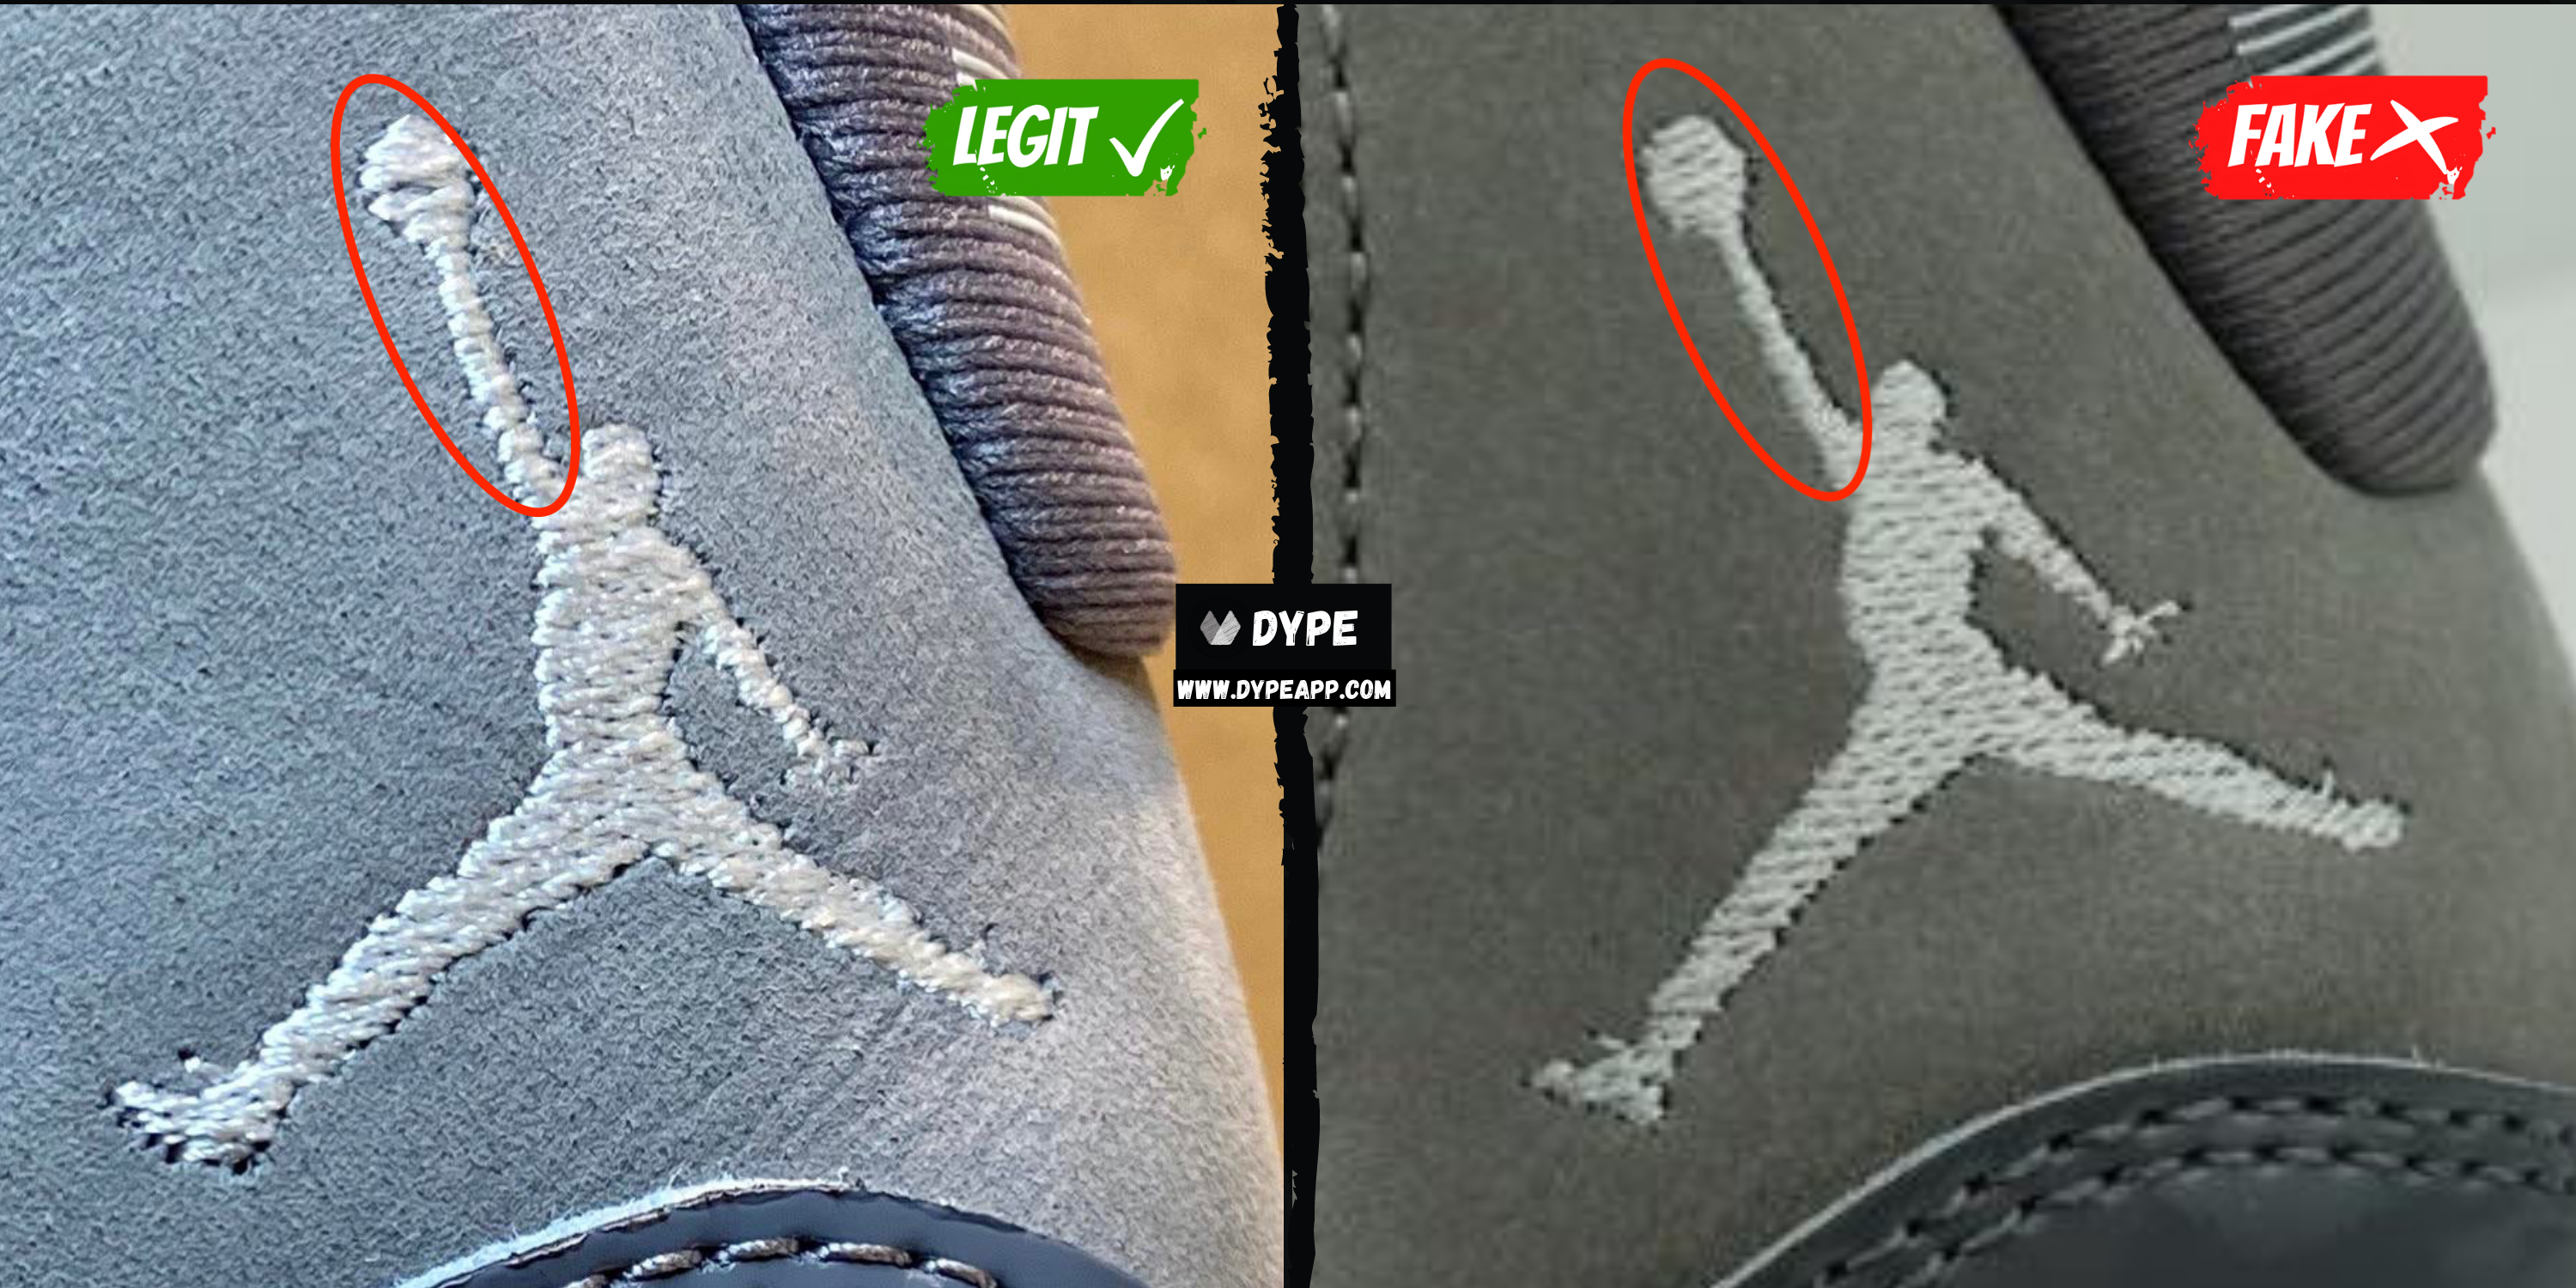 how to tell if air jordan 11 retro are fake